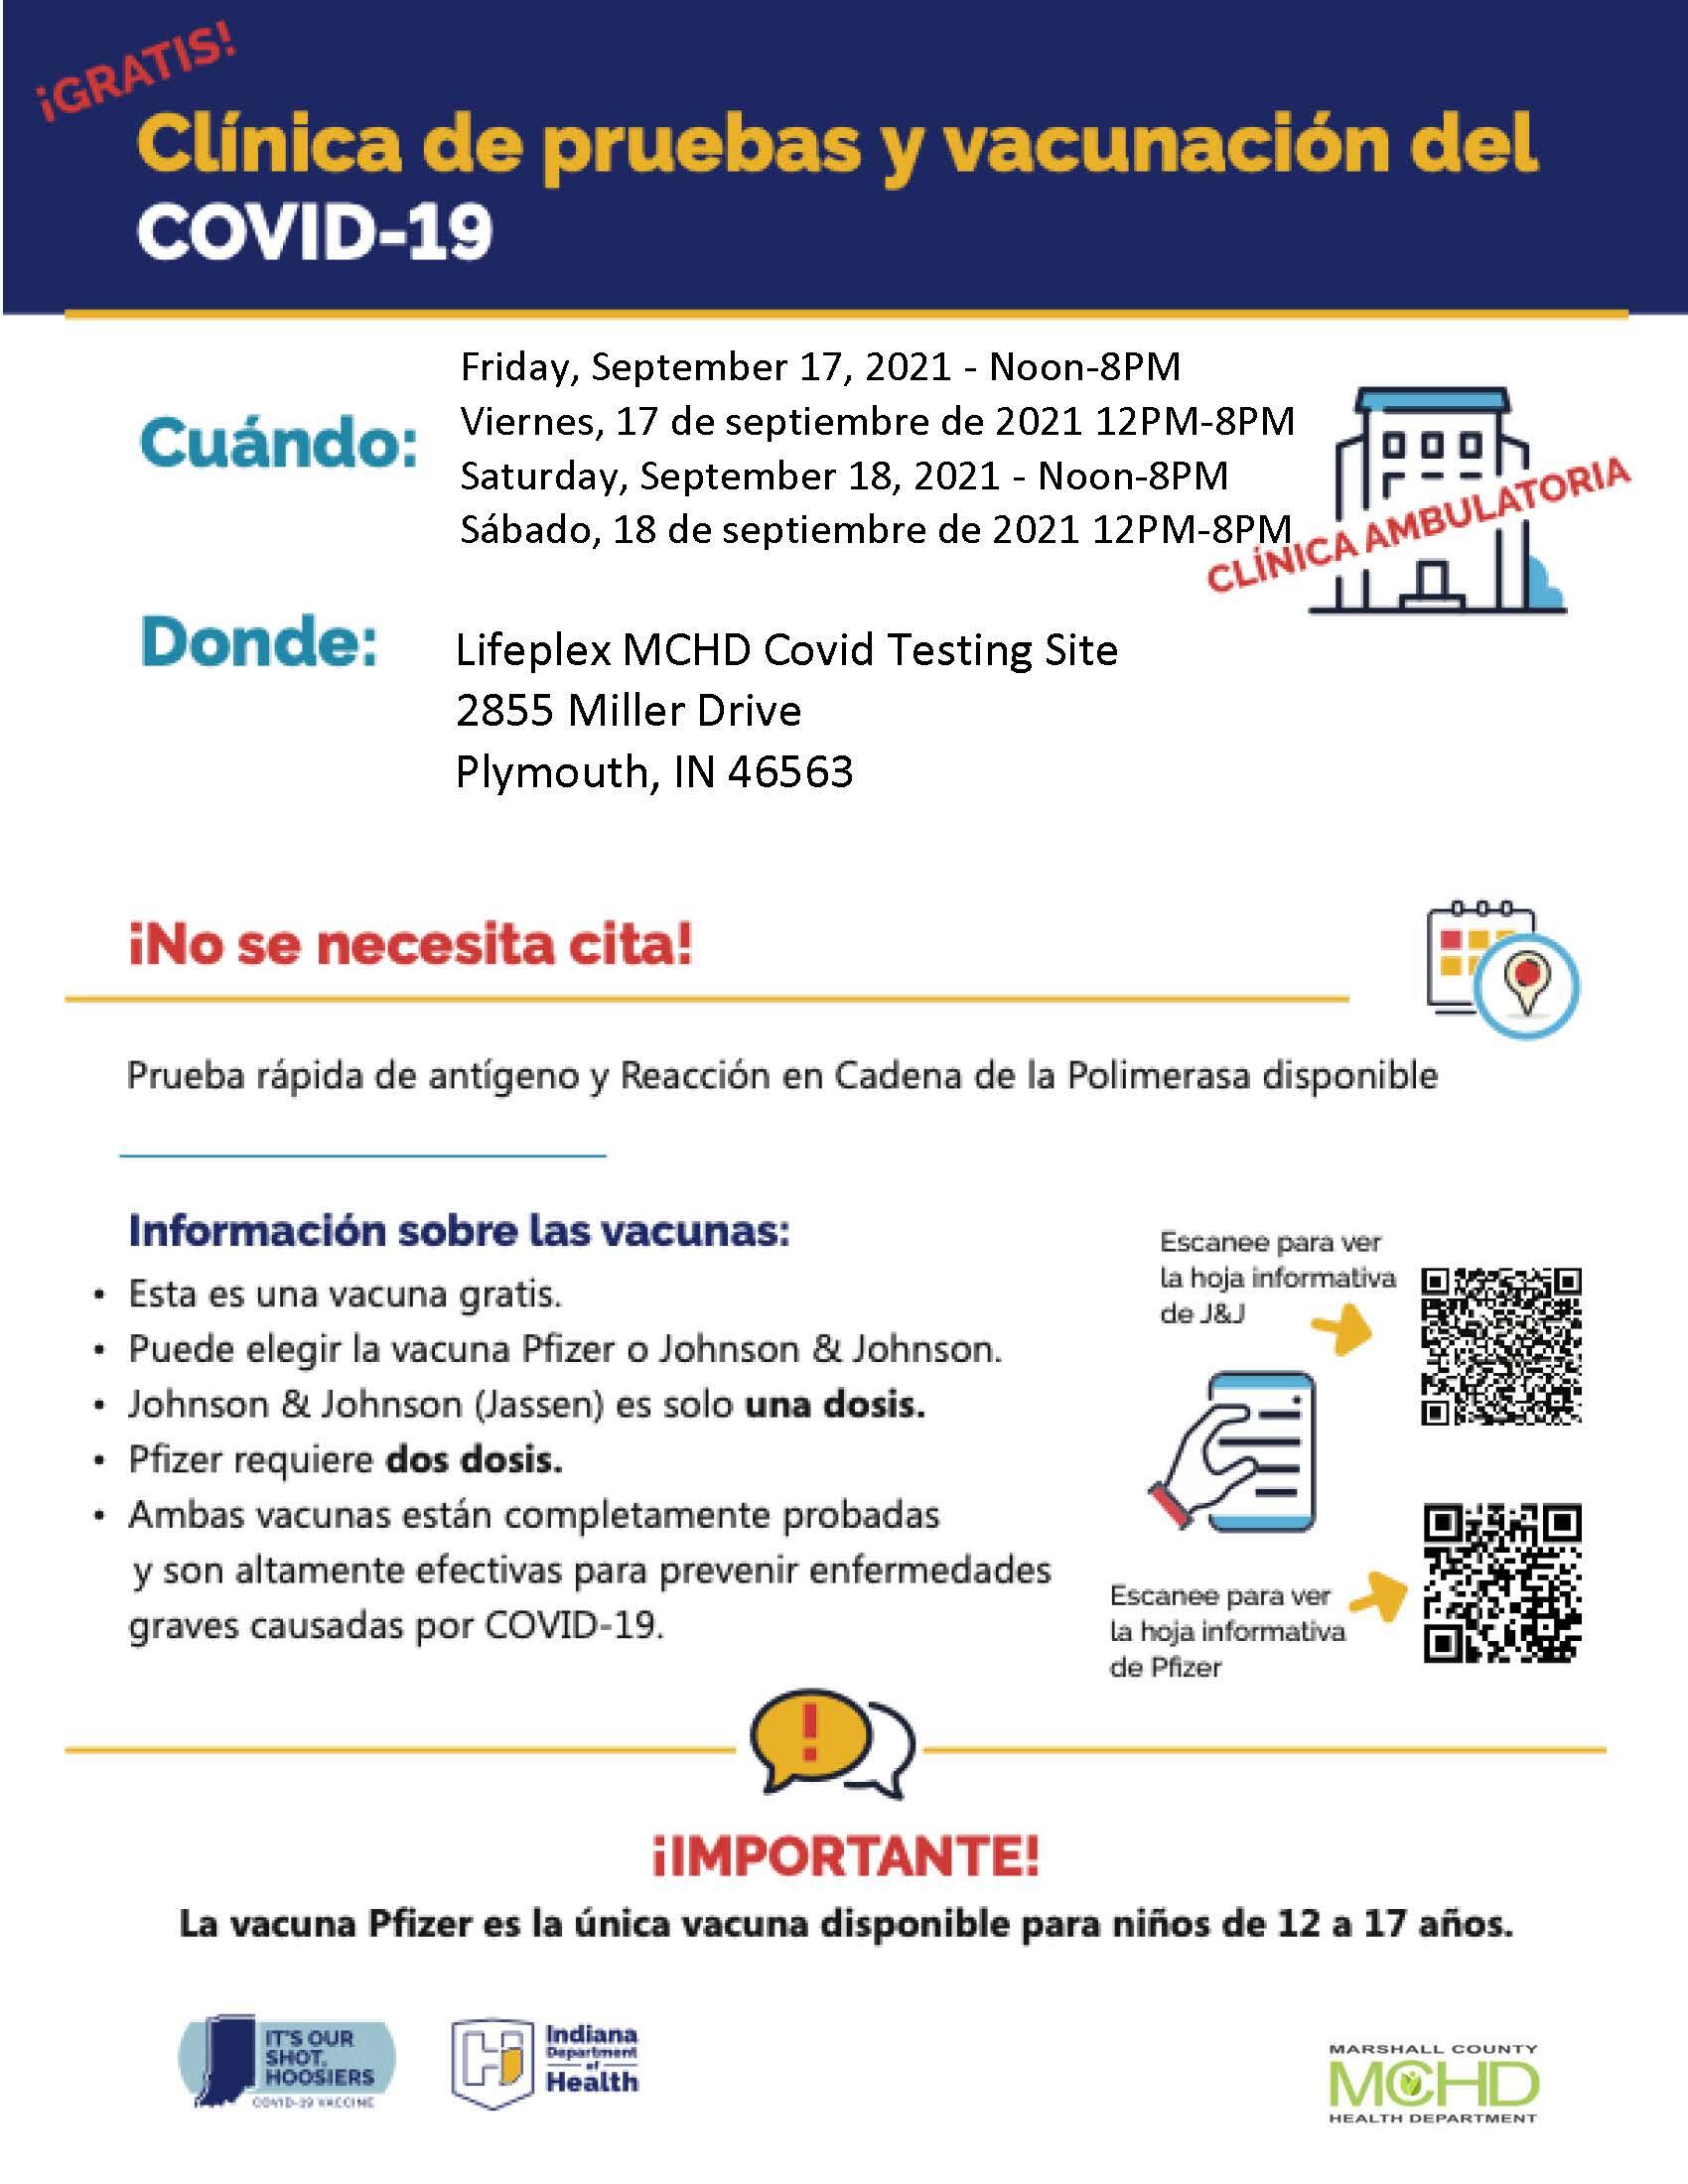 There will be a COVID-19 Testing and Vaccination Clinic on Friday, September 17, 2021 from noon- 8 p.m. and on Saturday, September 18, 2021 from noon-8 p.m. Friday, September 17, 2021 - Noon-8PM Viernes, 17 de septiembre de 2021 12PM-8PM Saturday, September 18, 2021 - Noon-8PM Sábado, 18 de septiembre de 2021 12PM-8PM FlyerFlyer